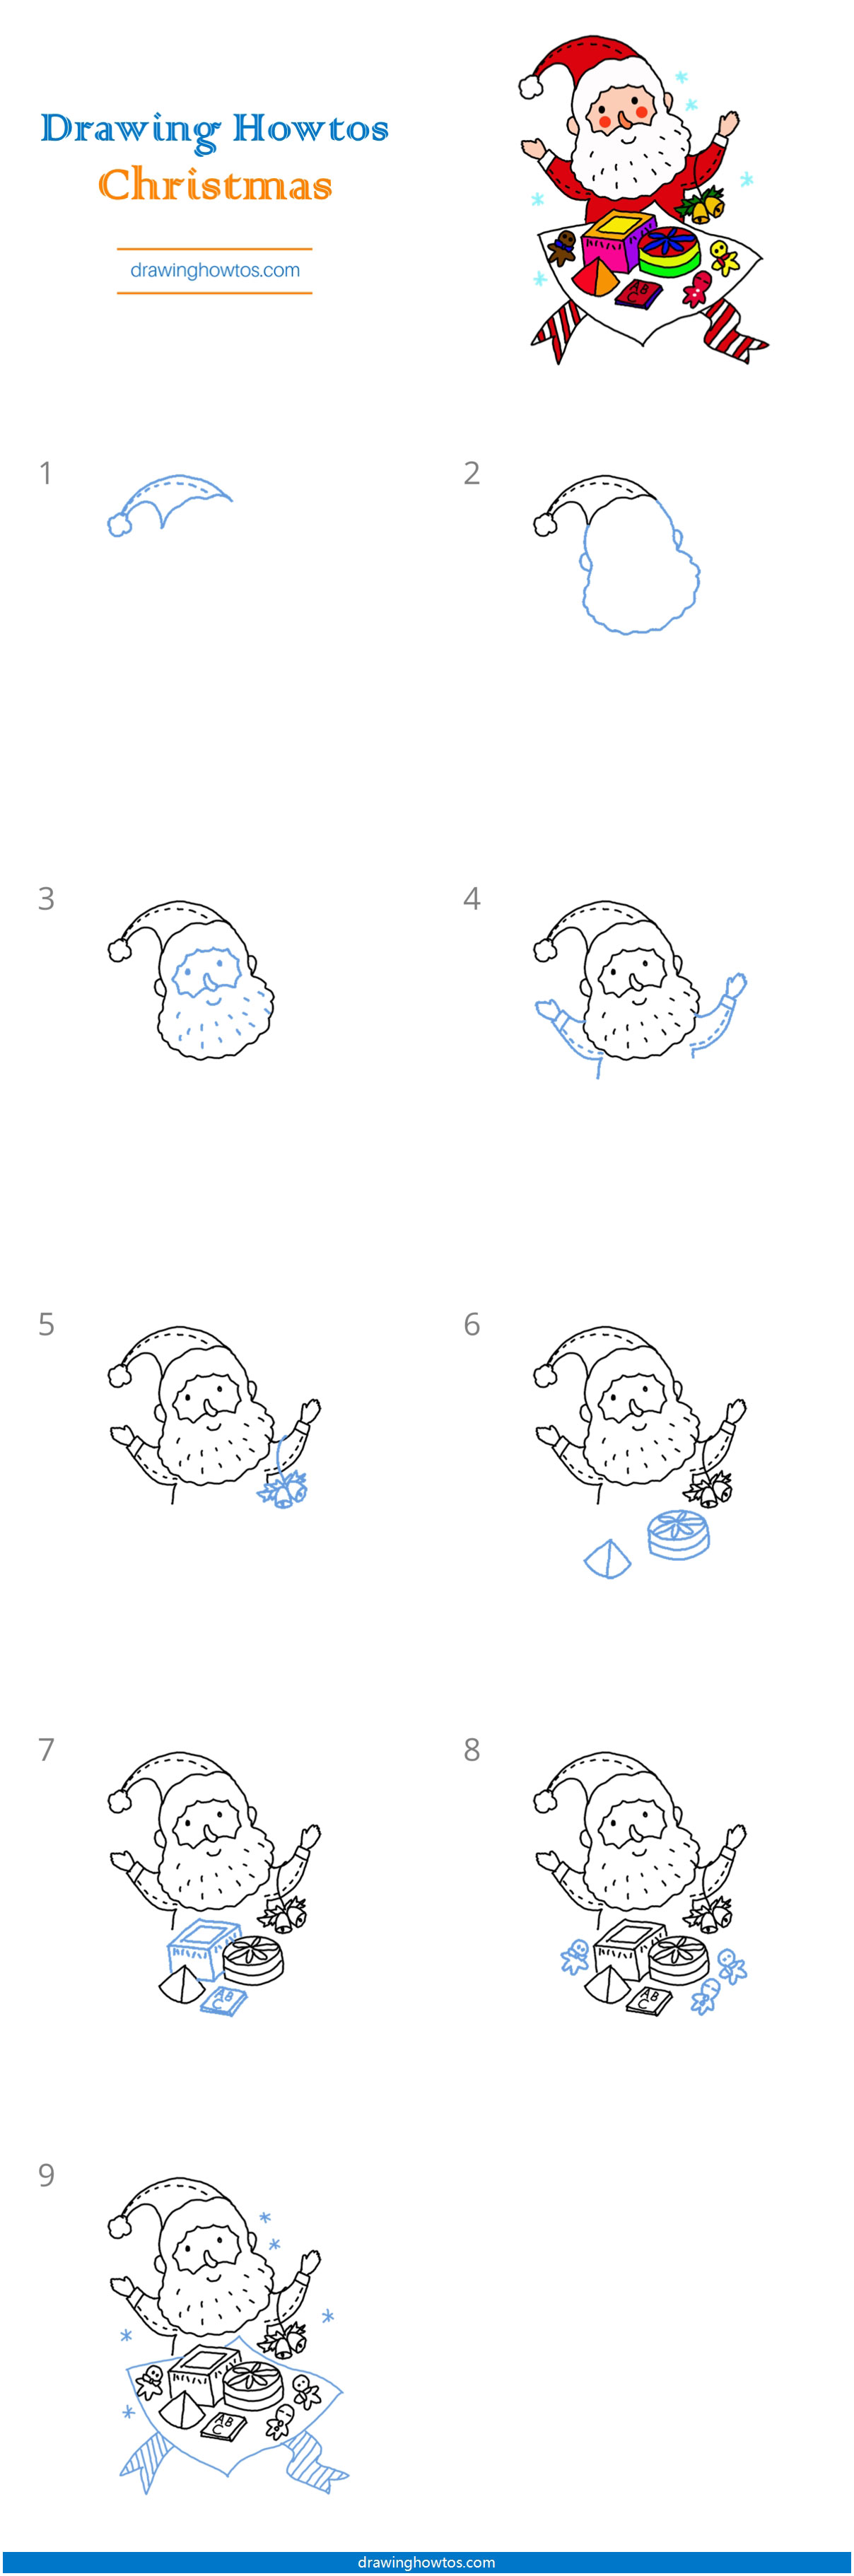 How to Draw Santa Claus and Gifts Step by Step